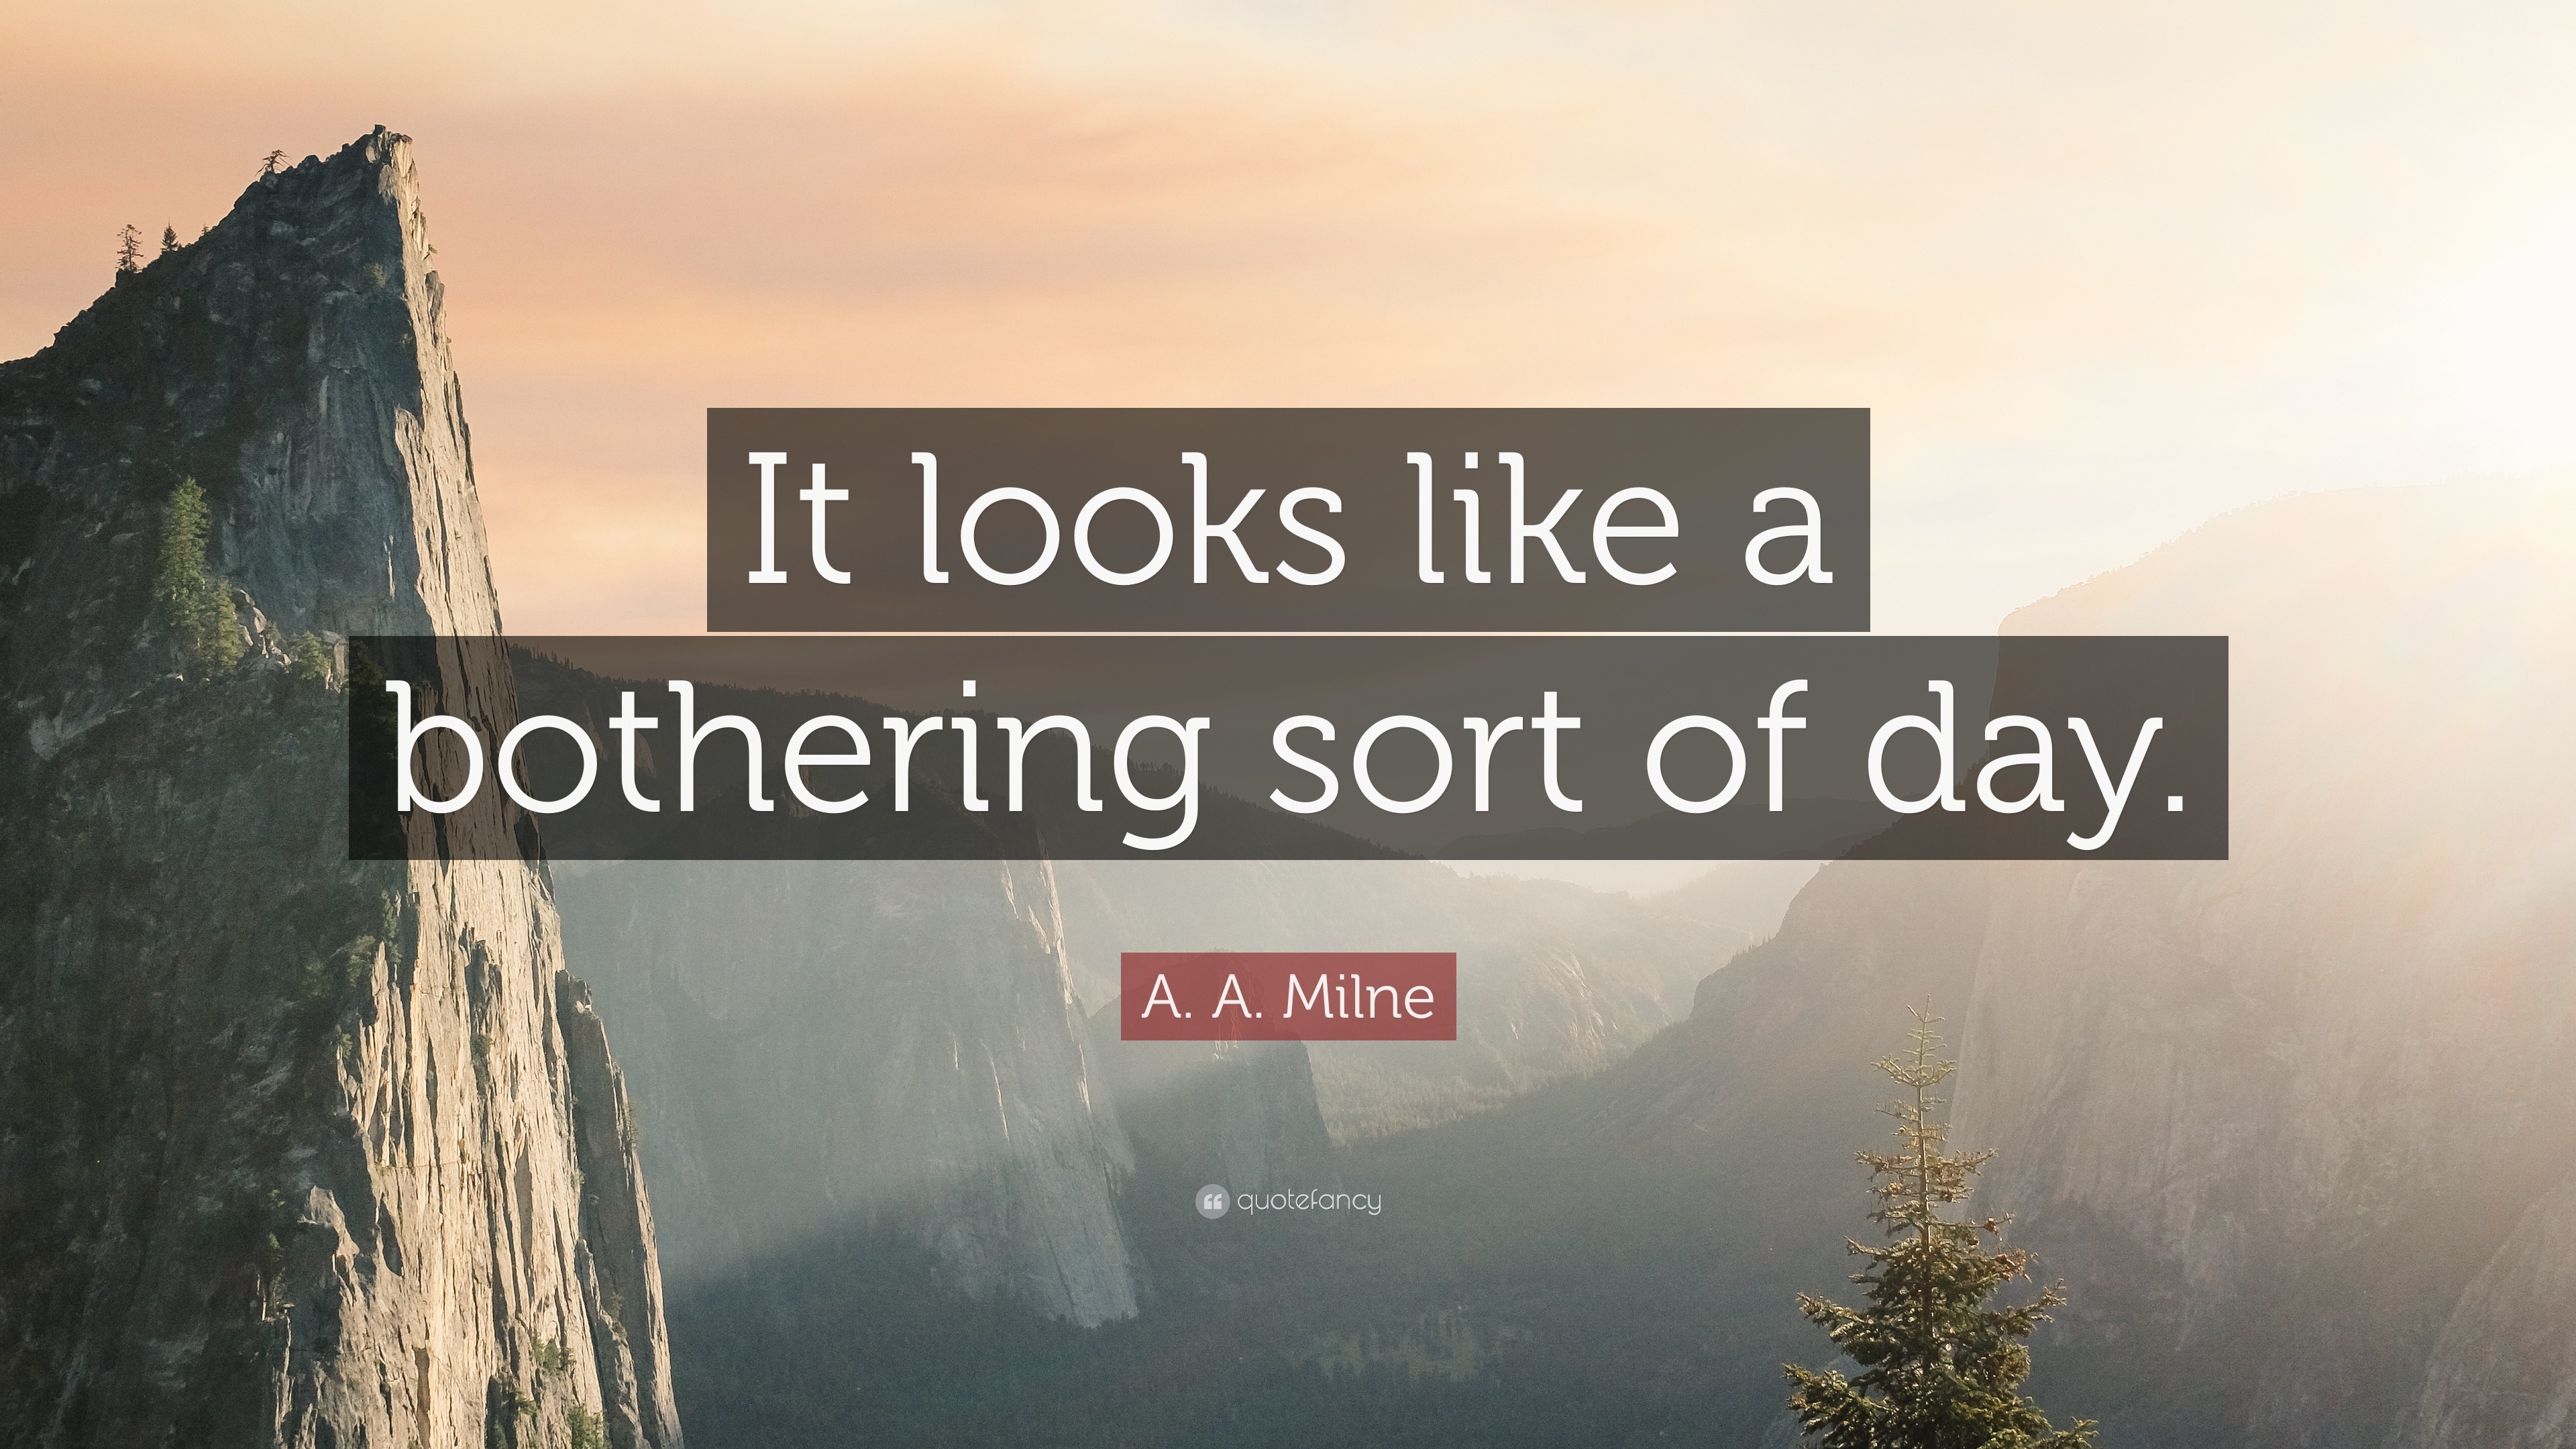 A. A. Milne Quotes (100 wallpapers) - Quotefancy